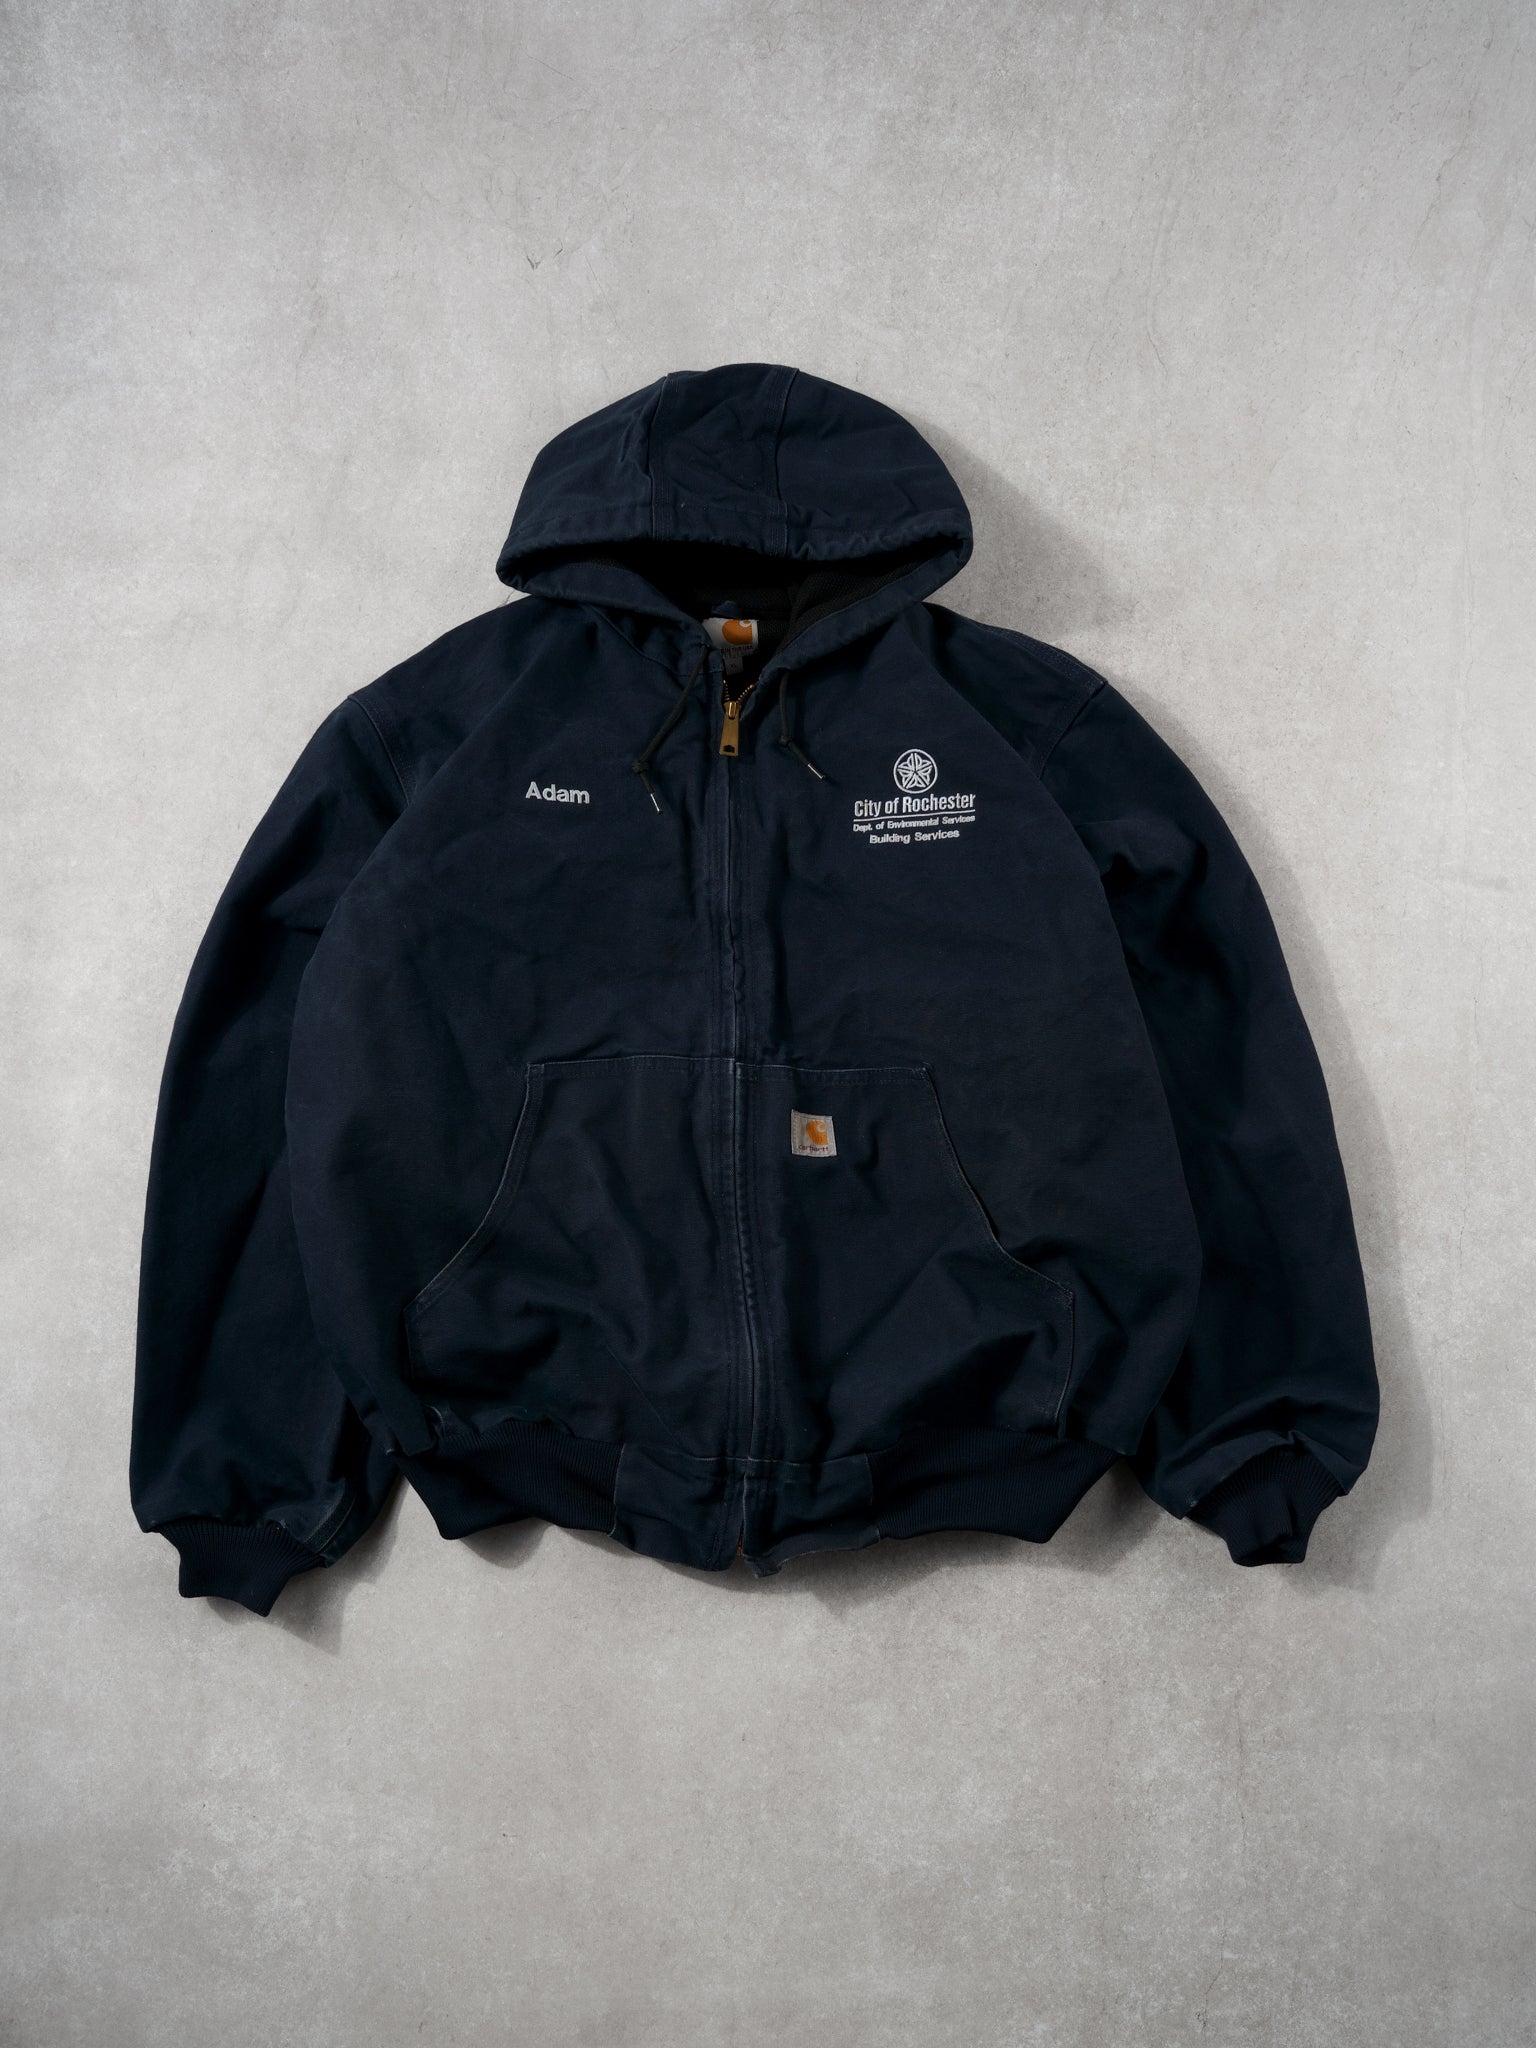 Vintage 90s Navy Blue City Of Rochester Environment Carhartt Workwear Hooded Jacket (L/XL)